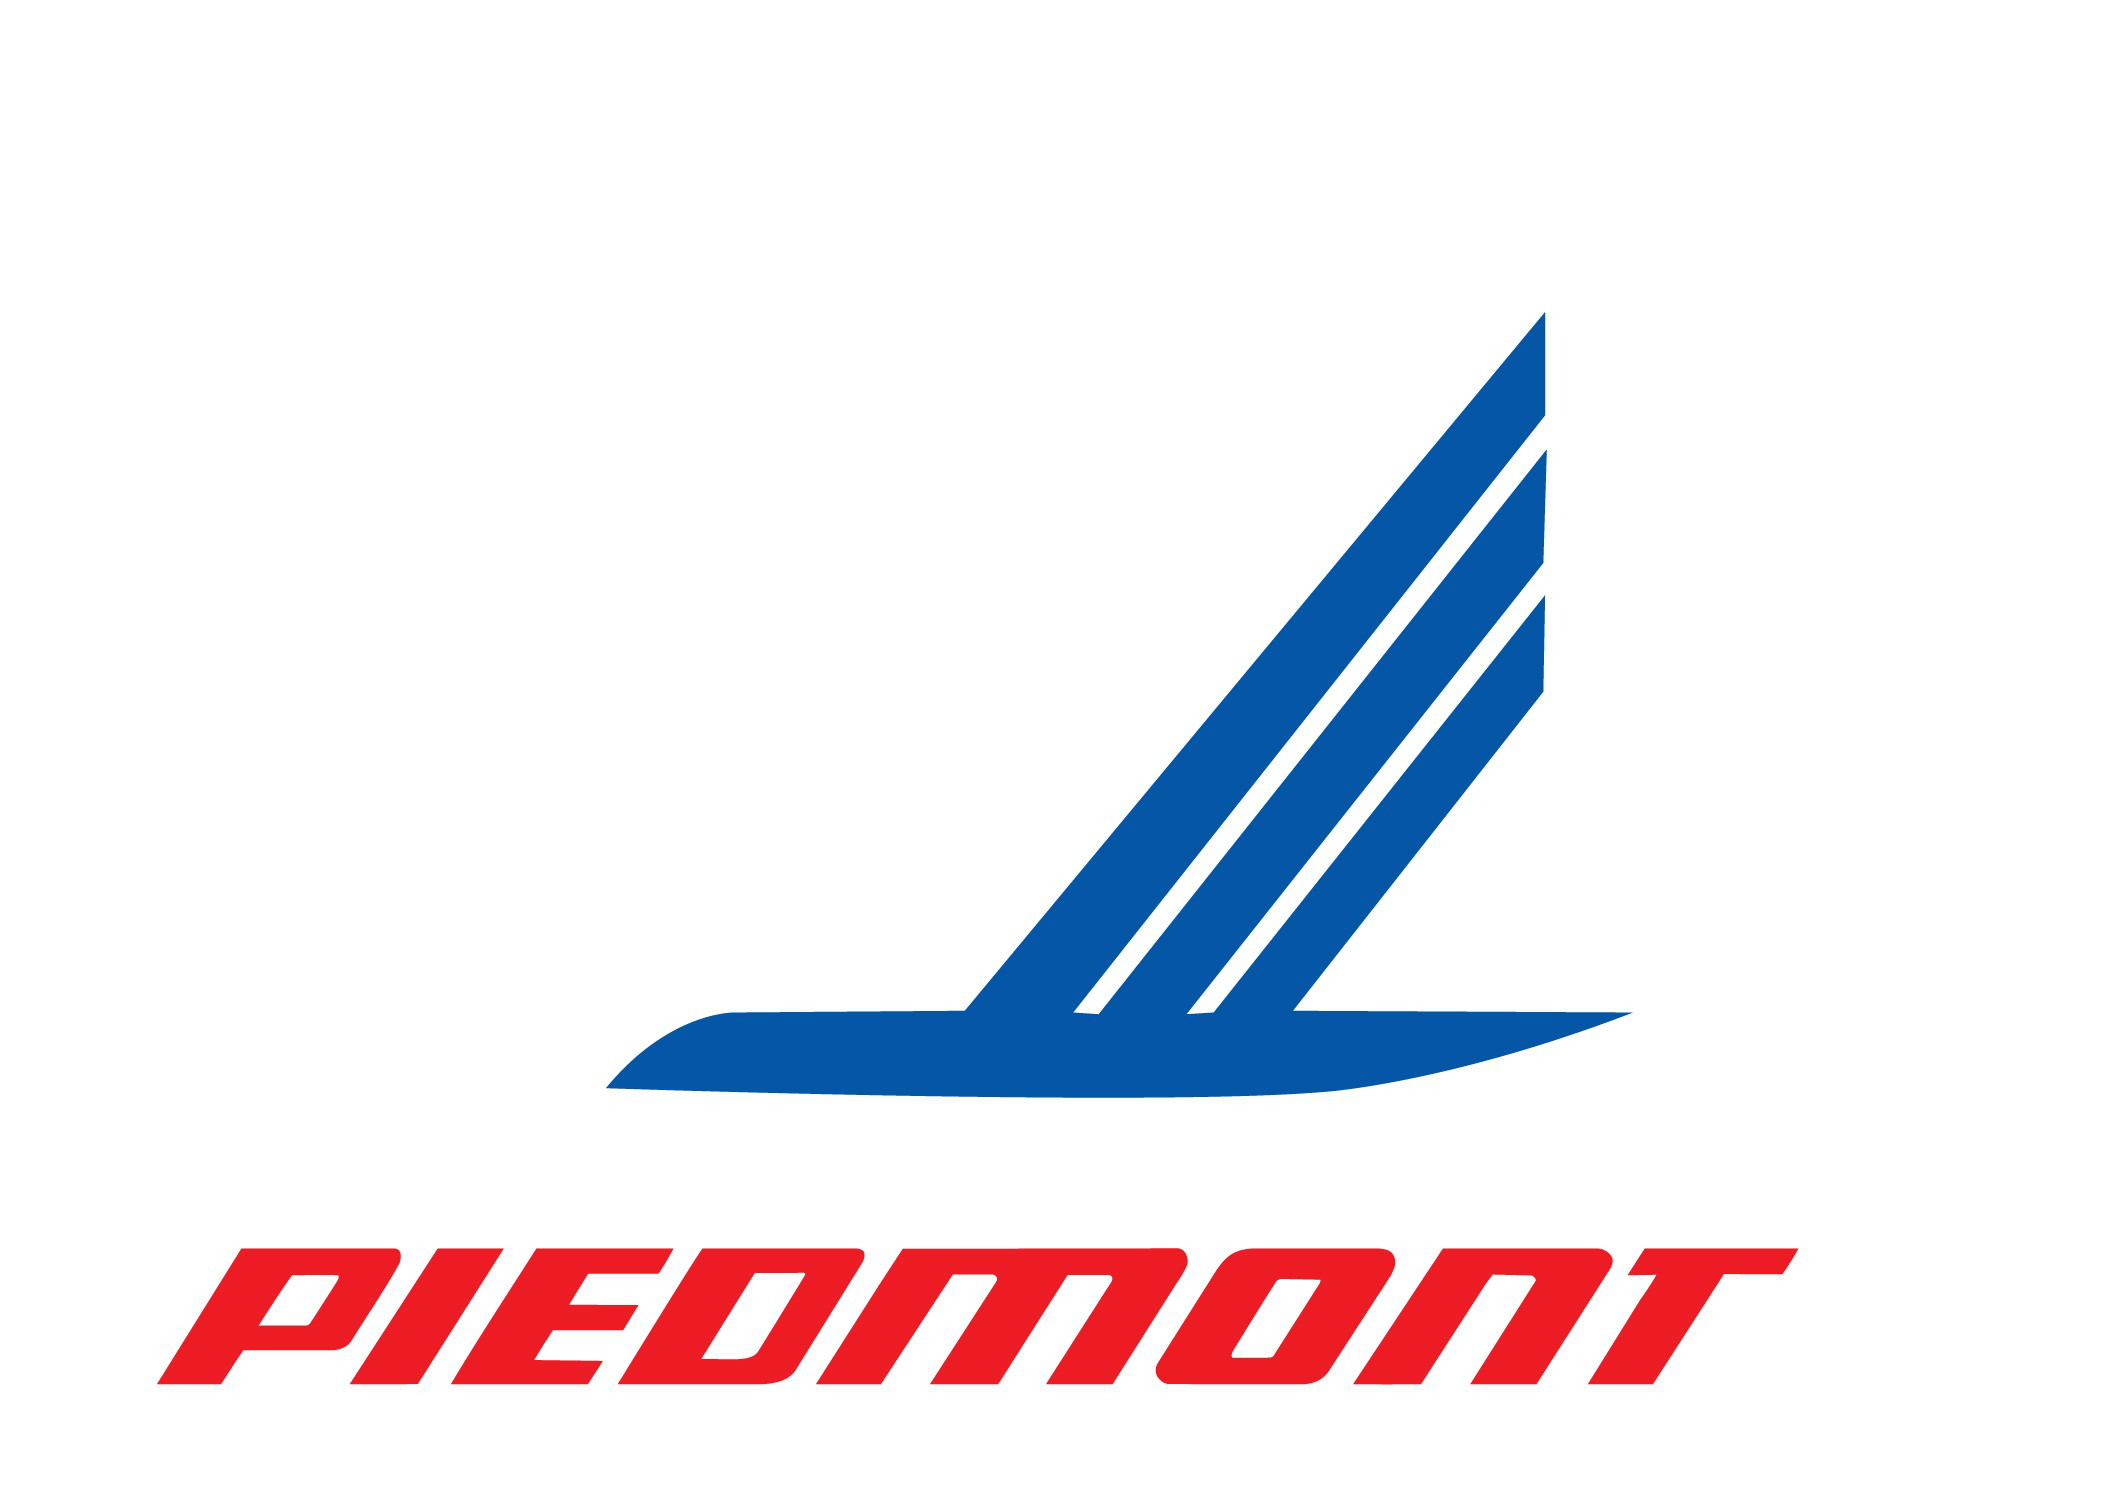 piedmont airlines logo.png